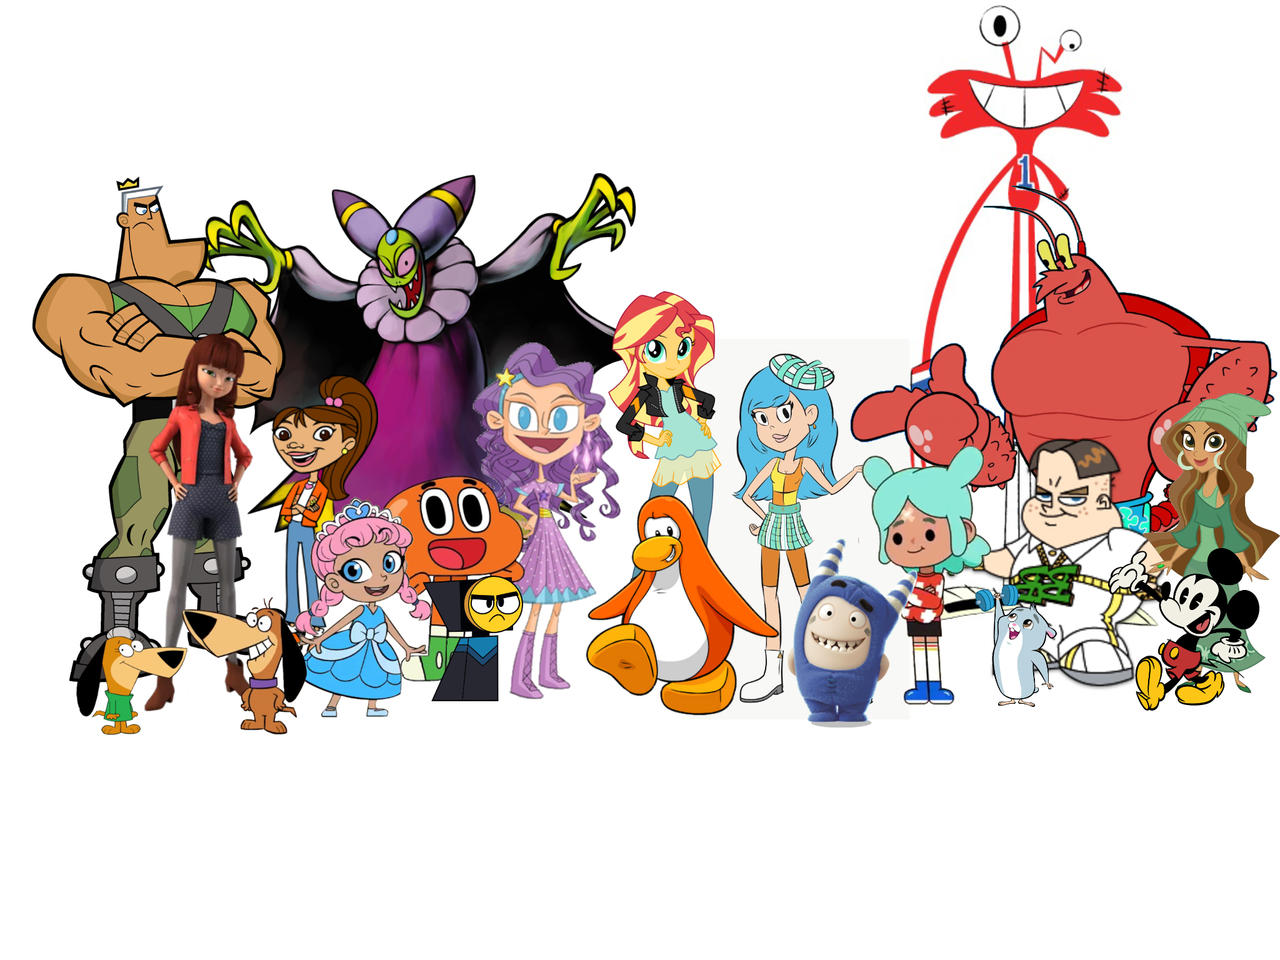 Cartoon Character Crossover Group Photo #1 by penguinartist1999 on  DeviantArt